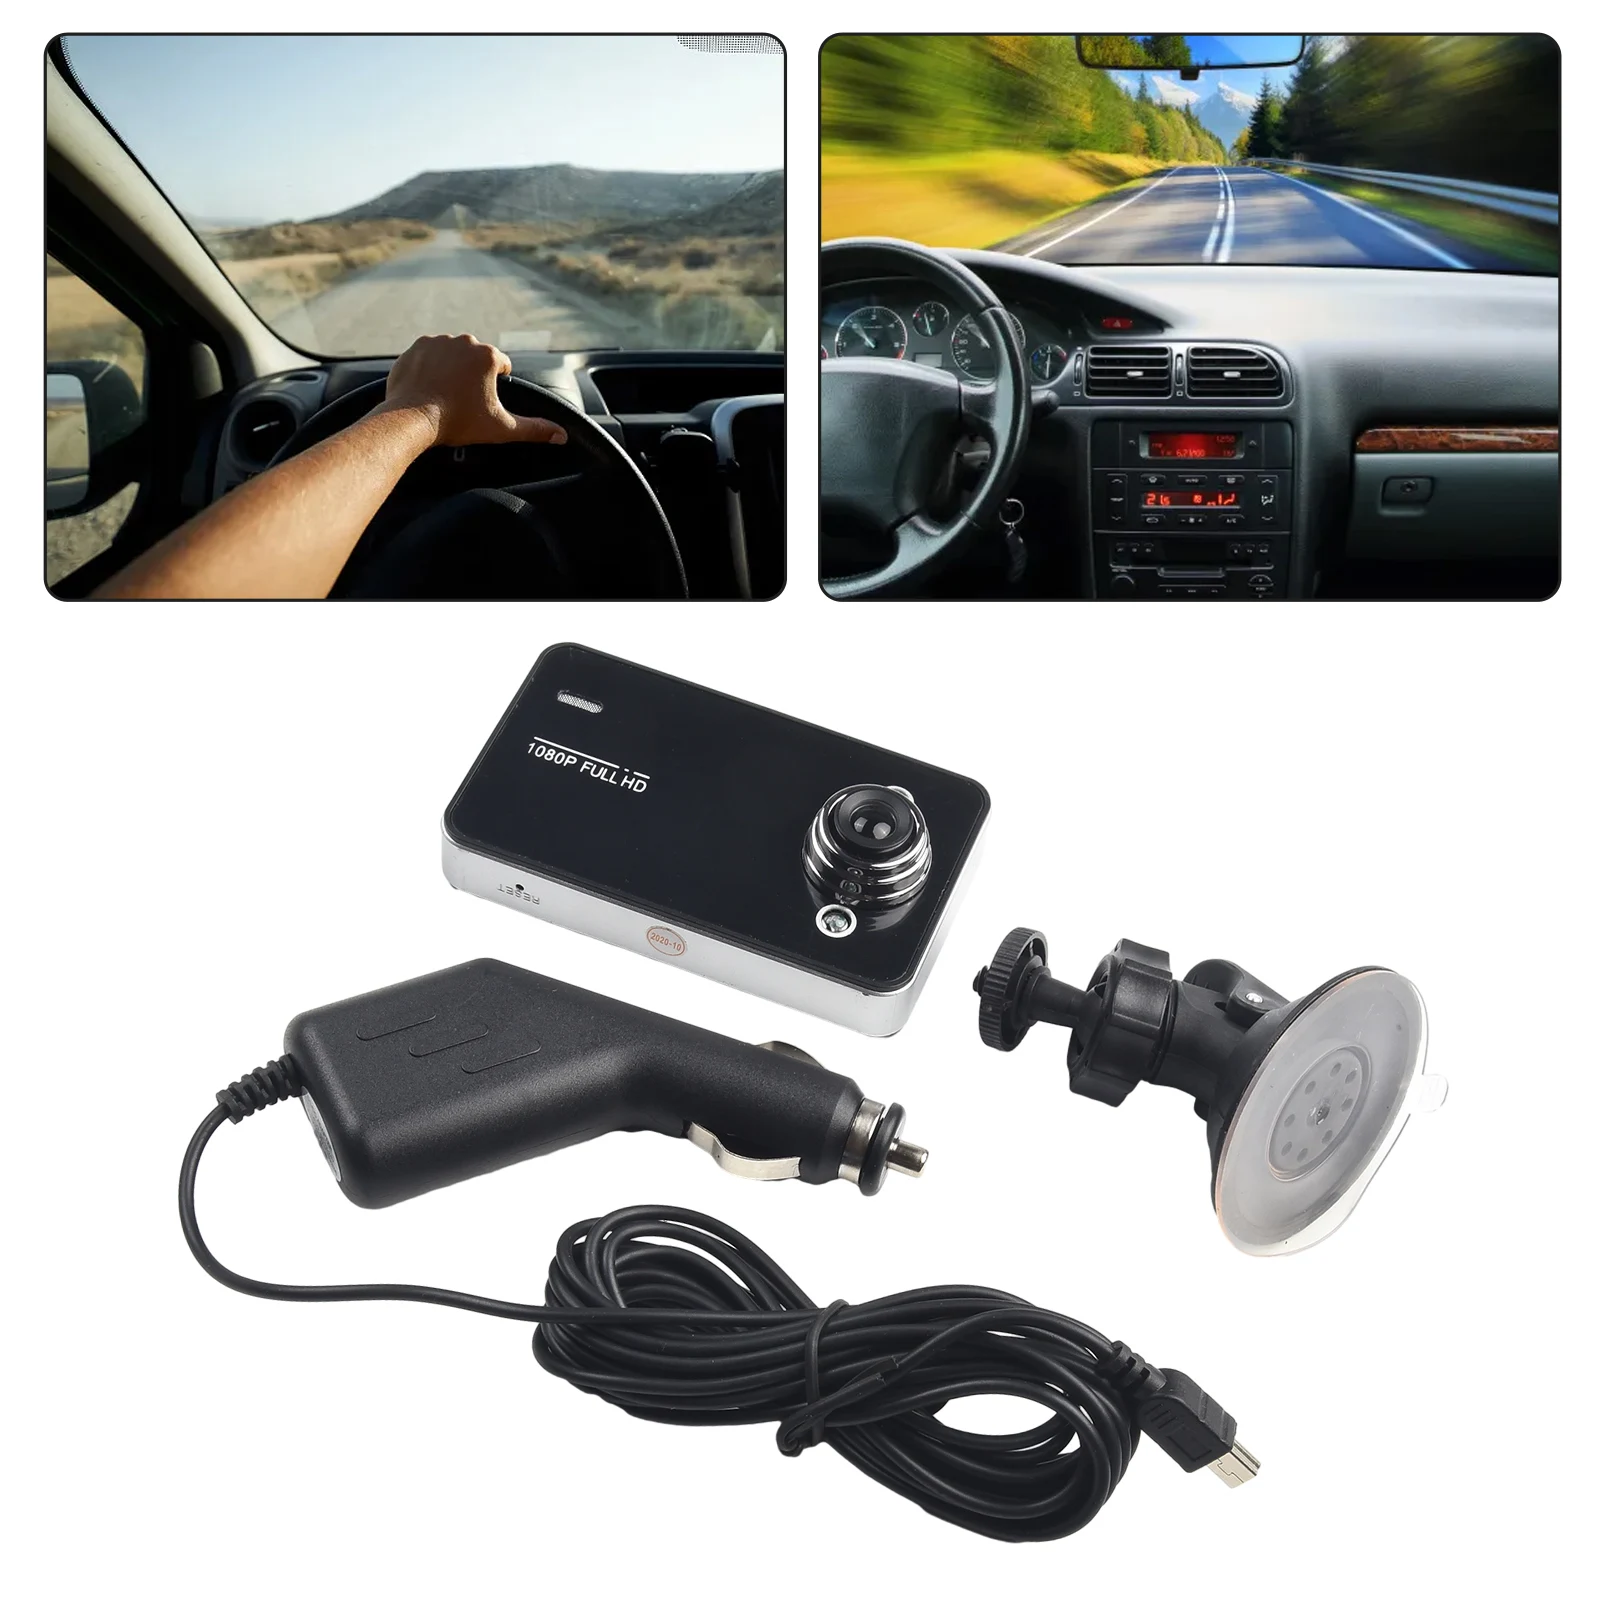 

1pc Car DVR Recorder Car Video Recorder 170-degree Charger Cable NTSC/PAL Video Output Suction Cup Stand Mount